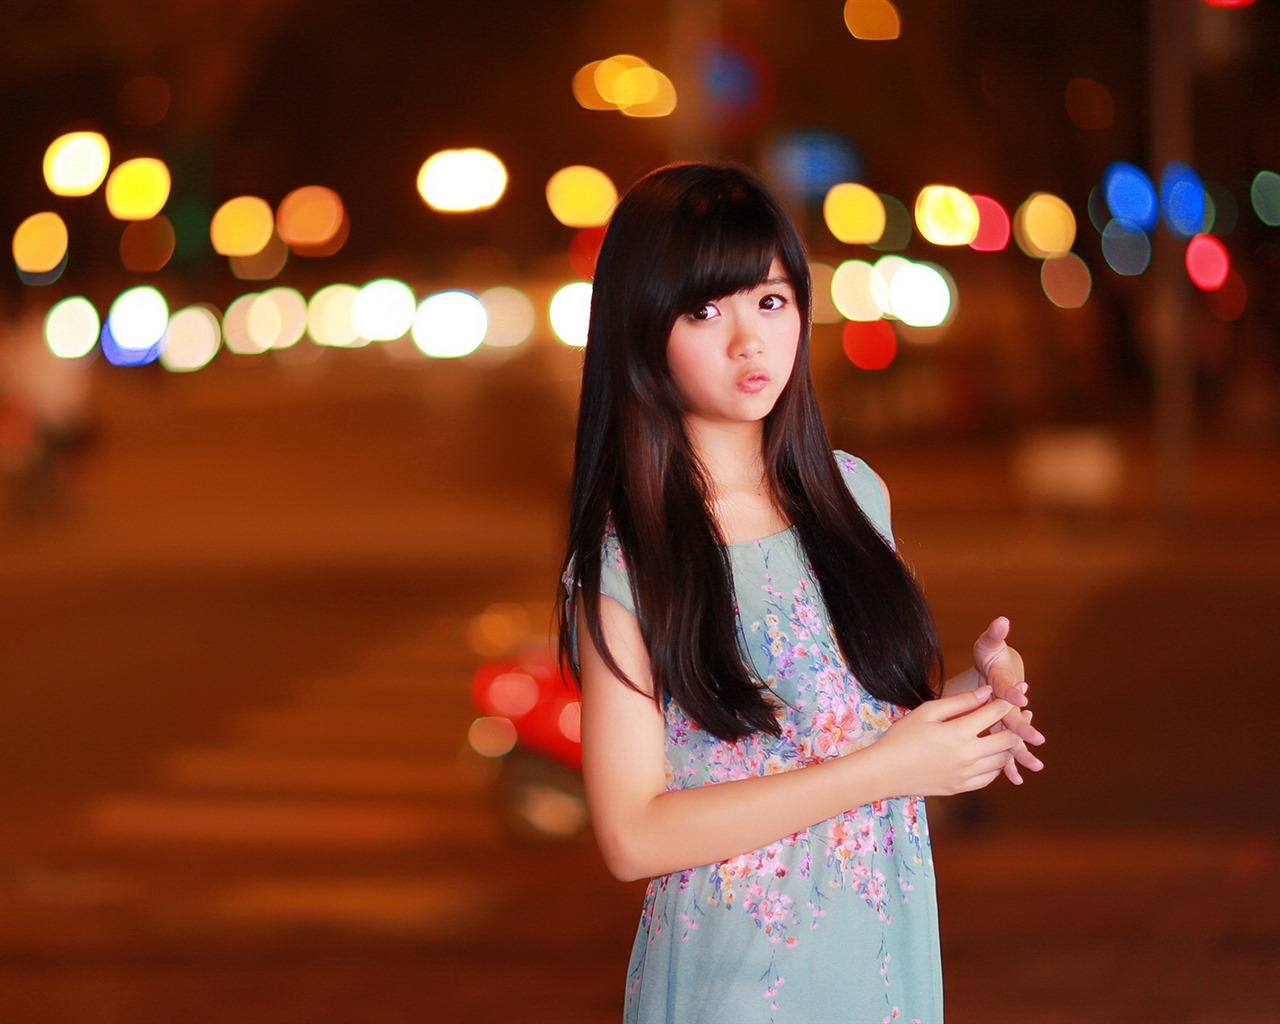 Pure and lovely young Asian girl HD wallpapers collection (3) #27 - 1280x1024